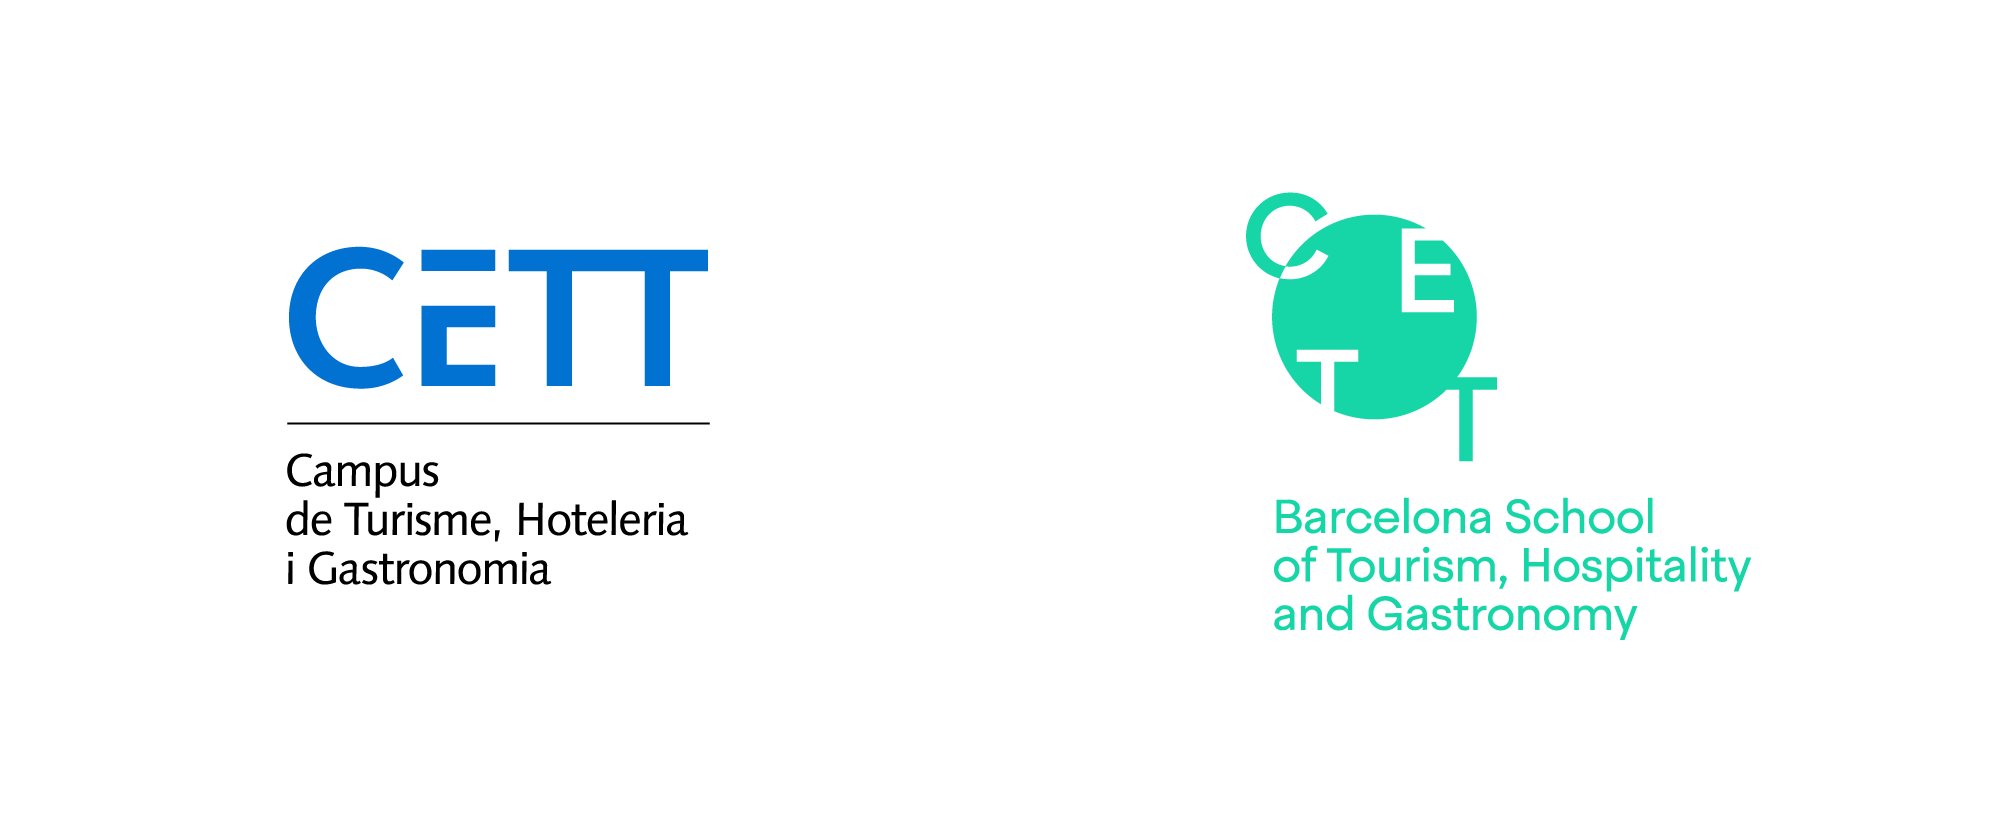 New Logo and Identity for CETT by Mucho